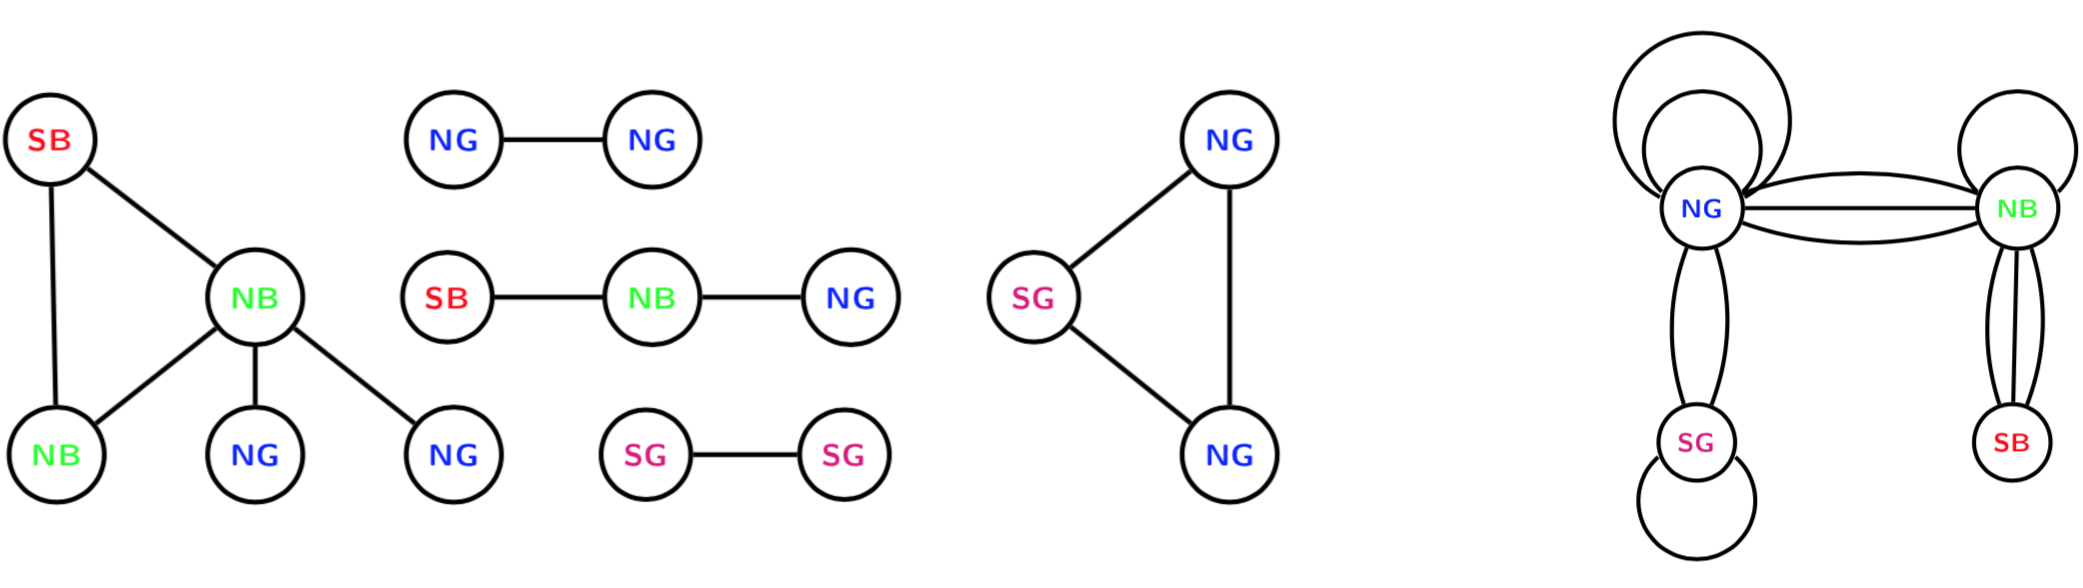 Examples of multigraphs